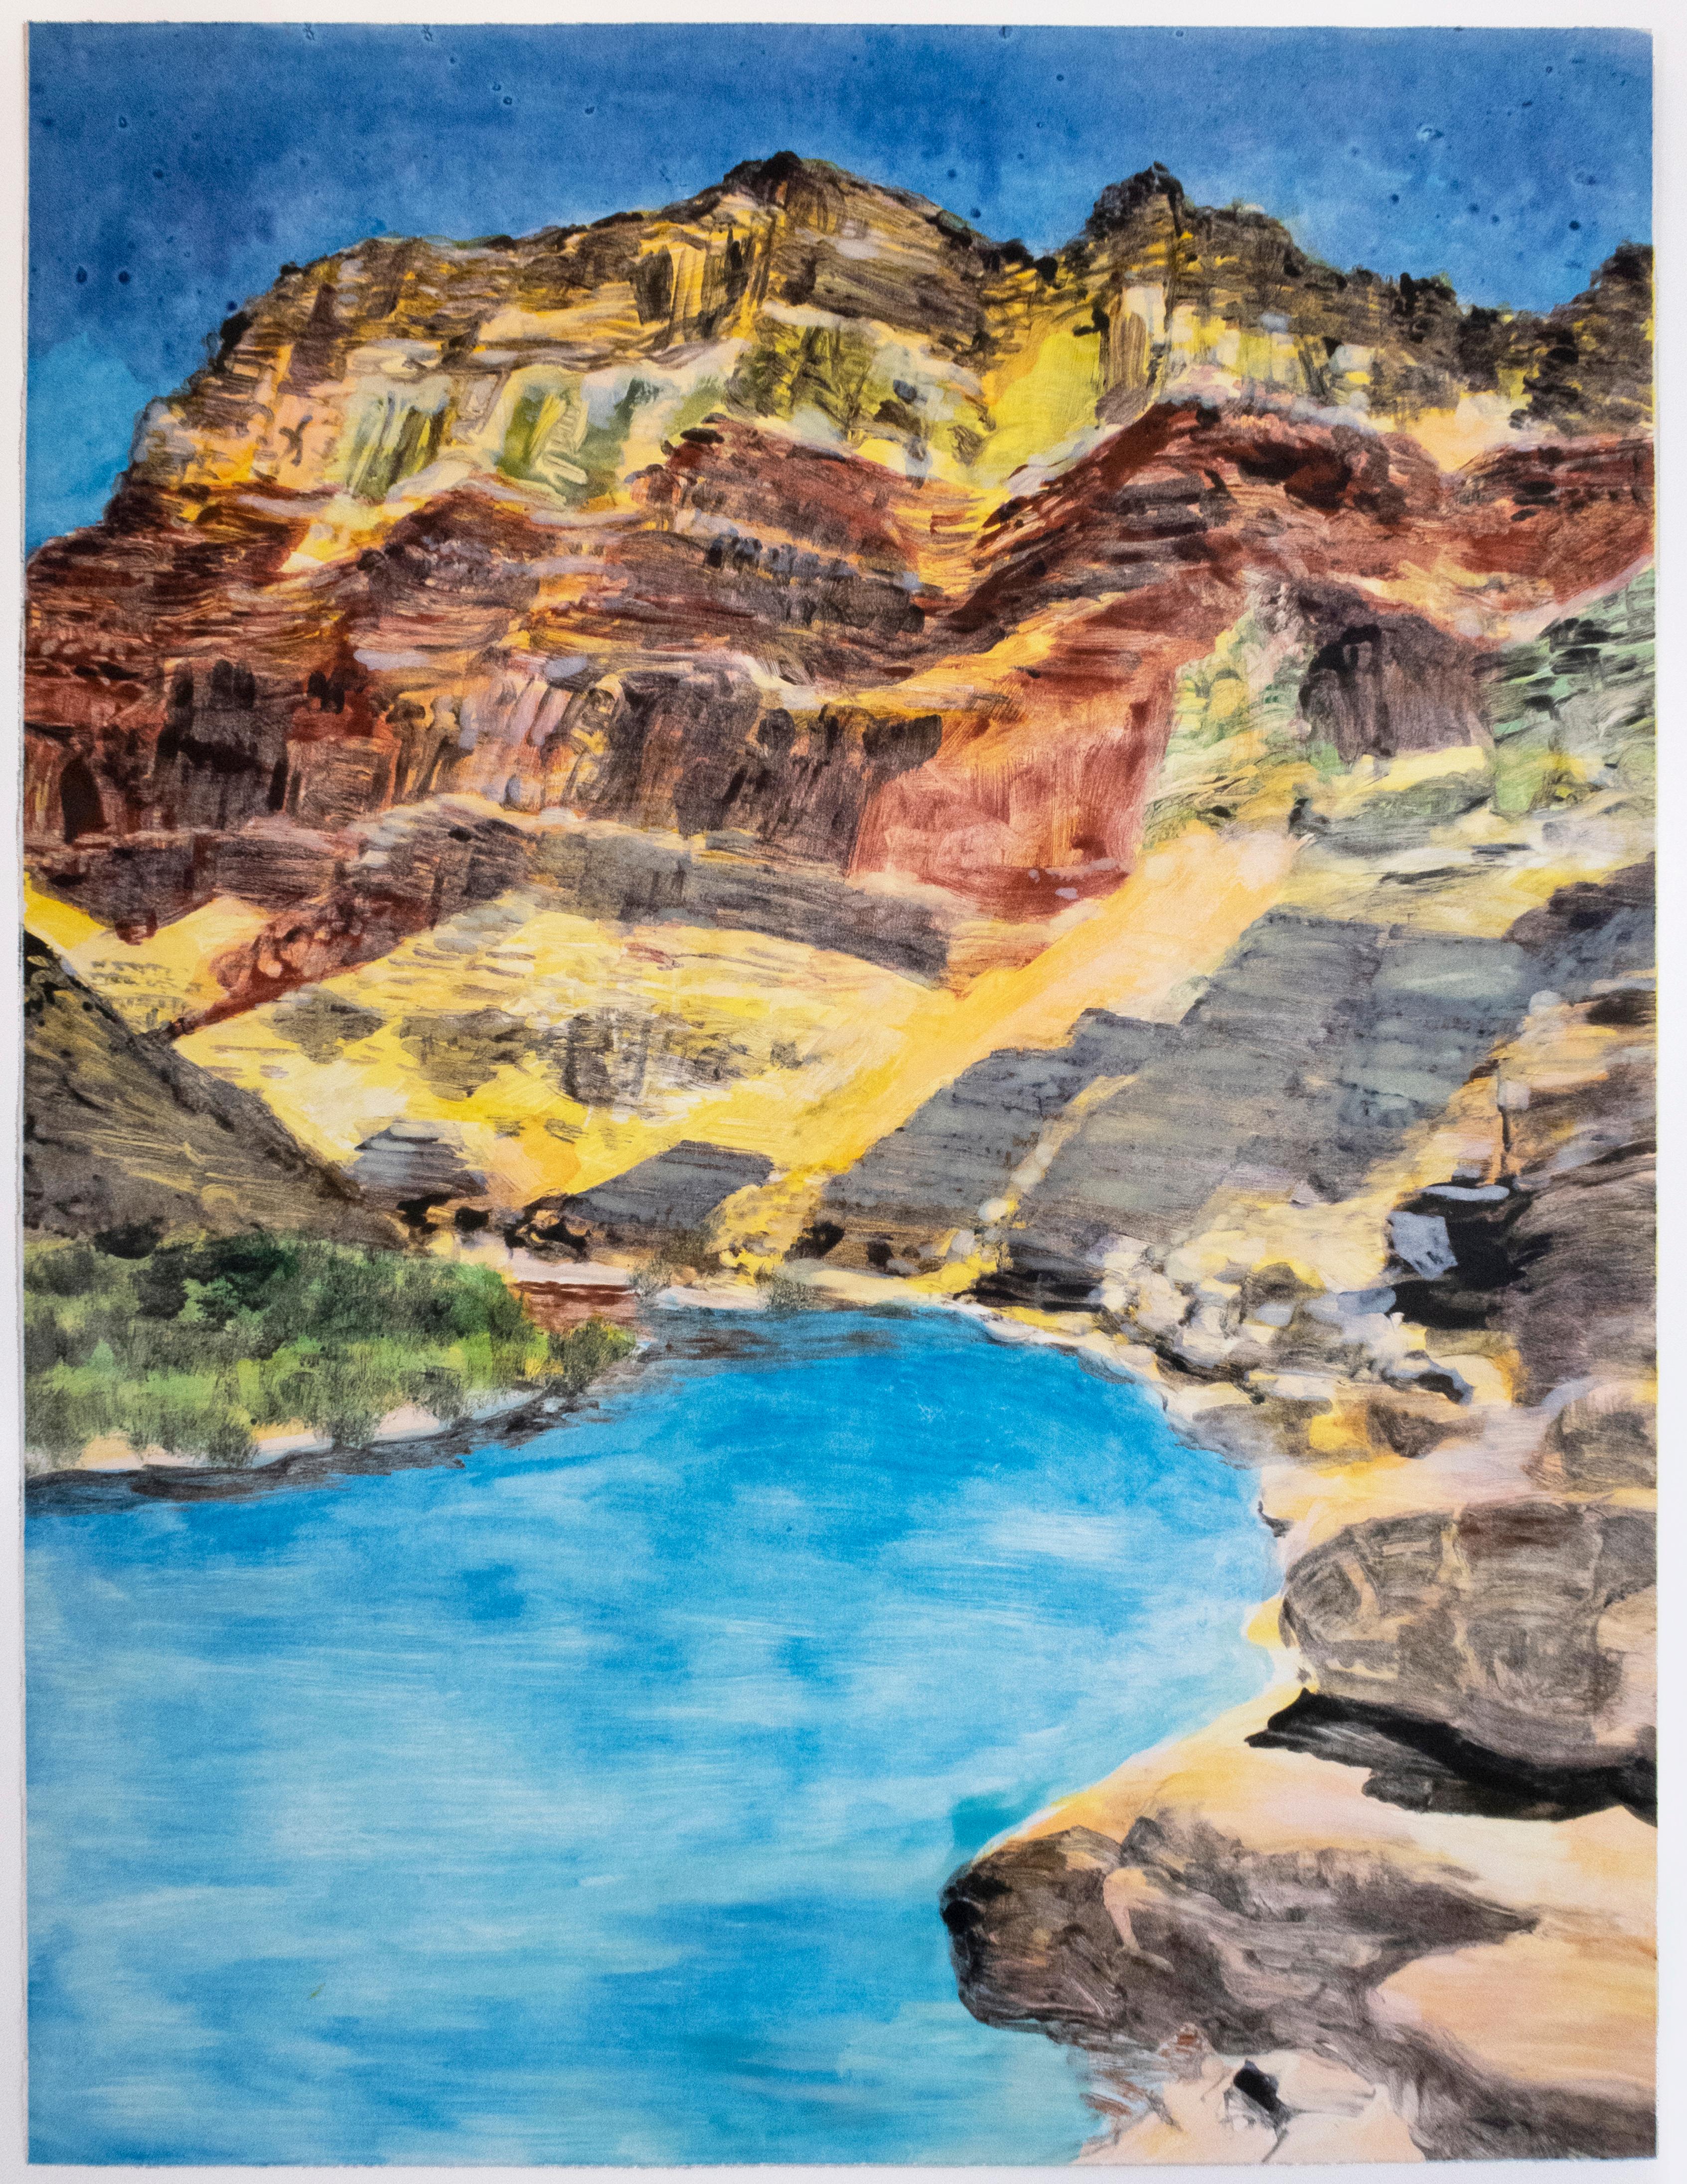 On the Map: Large scale color monotype, Western mountain landscape with blue sky - Print by Michele Zalopany